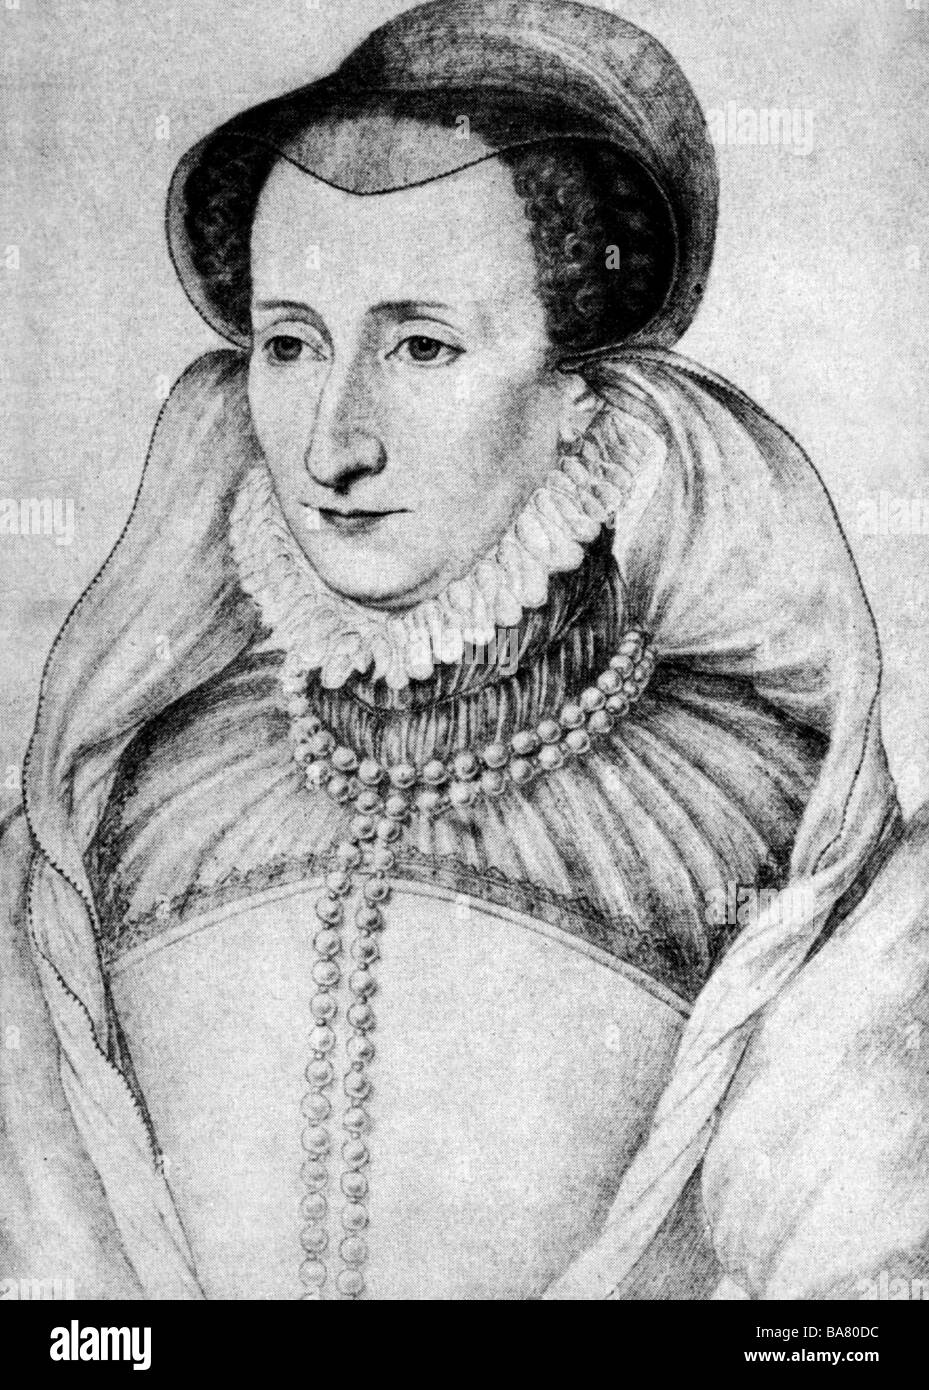 Jeanne III, 7.1.1528 - 9.6.1572, Queen of Navarre since 1555, portrait, drawing after contemporary image, Paris gallery of prints, Stock Photo